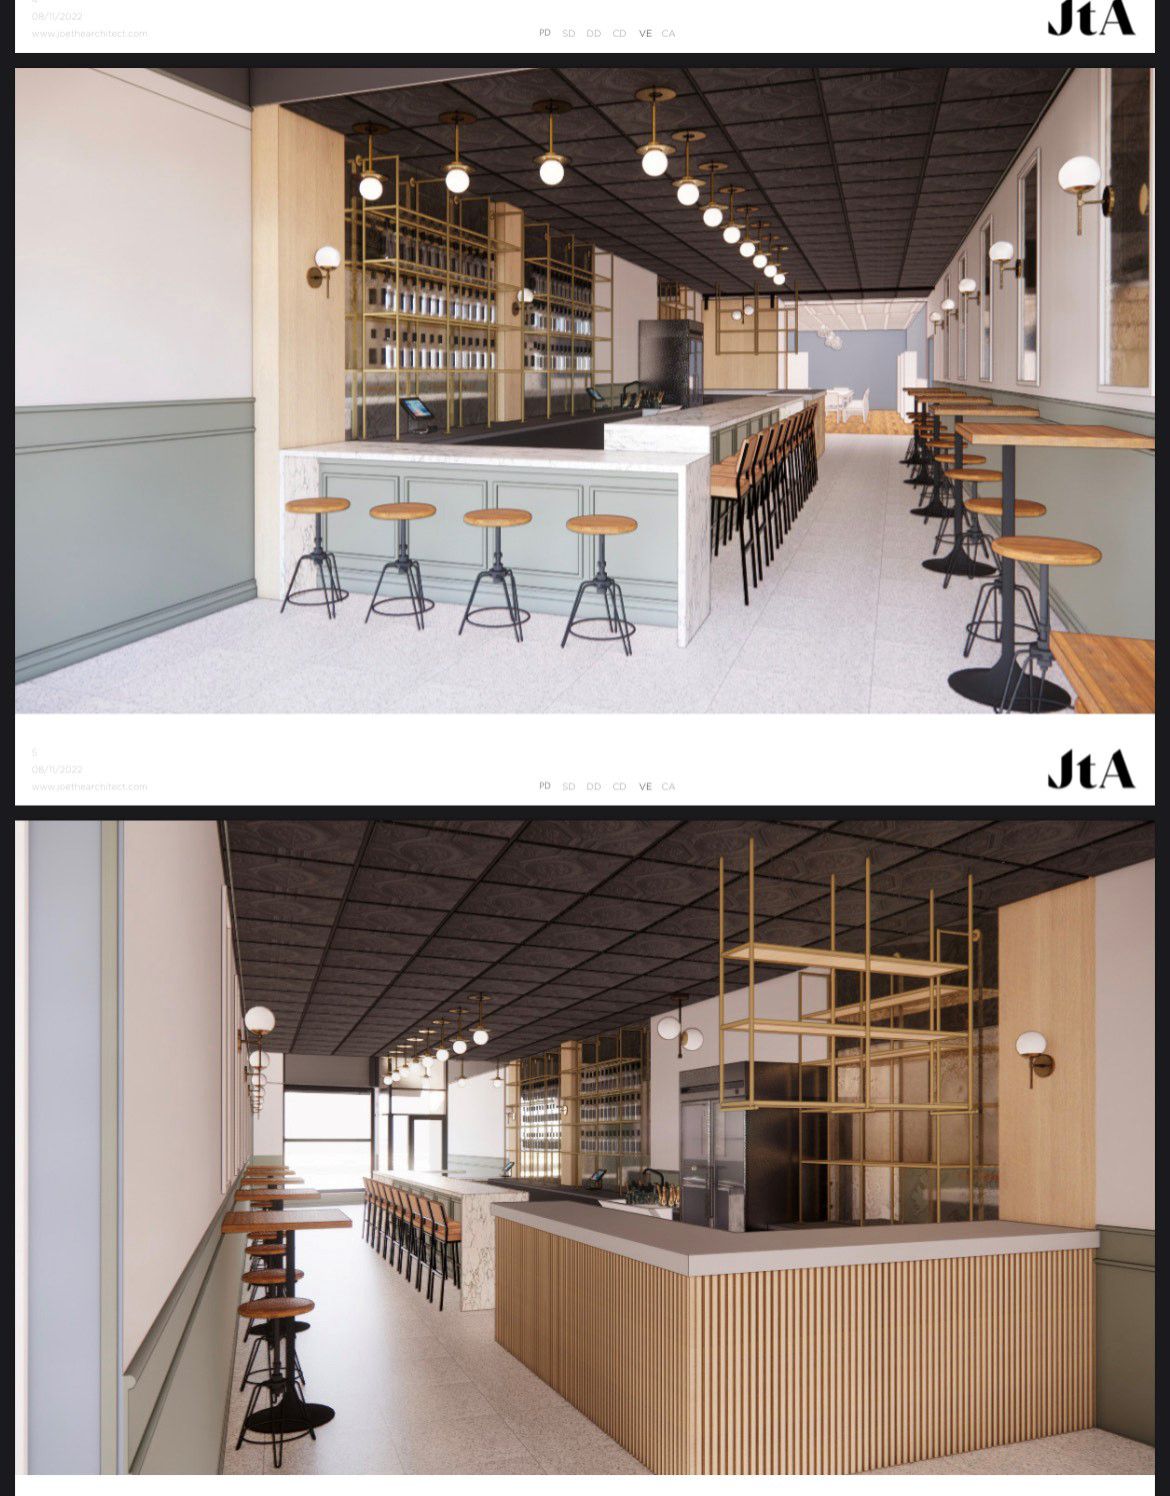 Two restaurant renderings show a long, narrow restaurant with a bar and some high-top seating, decorated with light wooden accents.